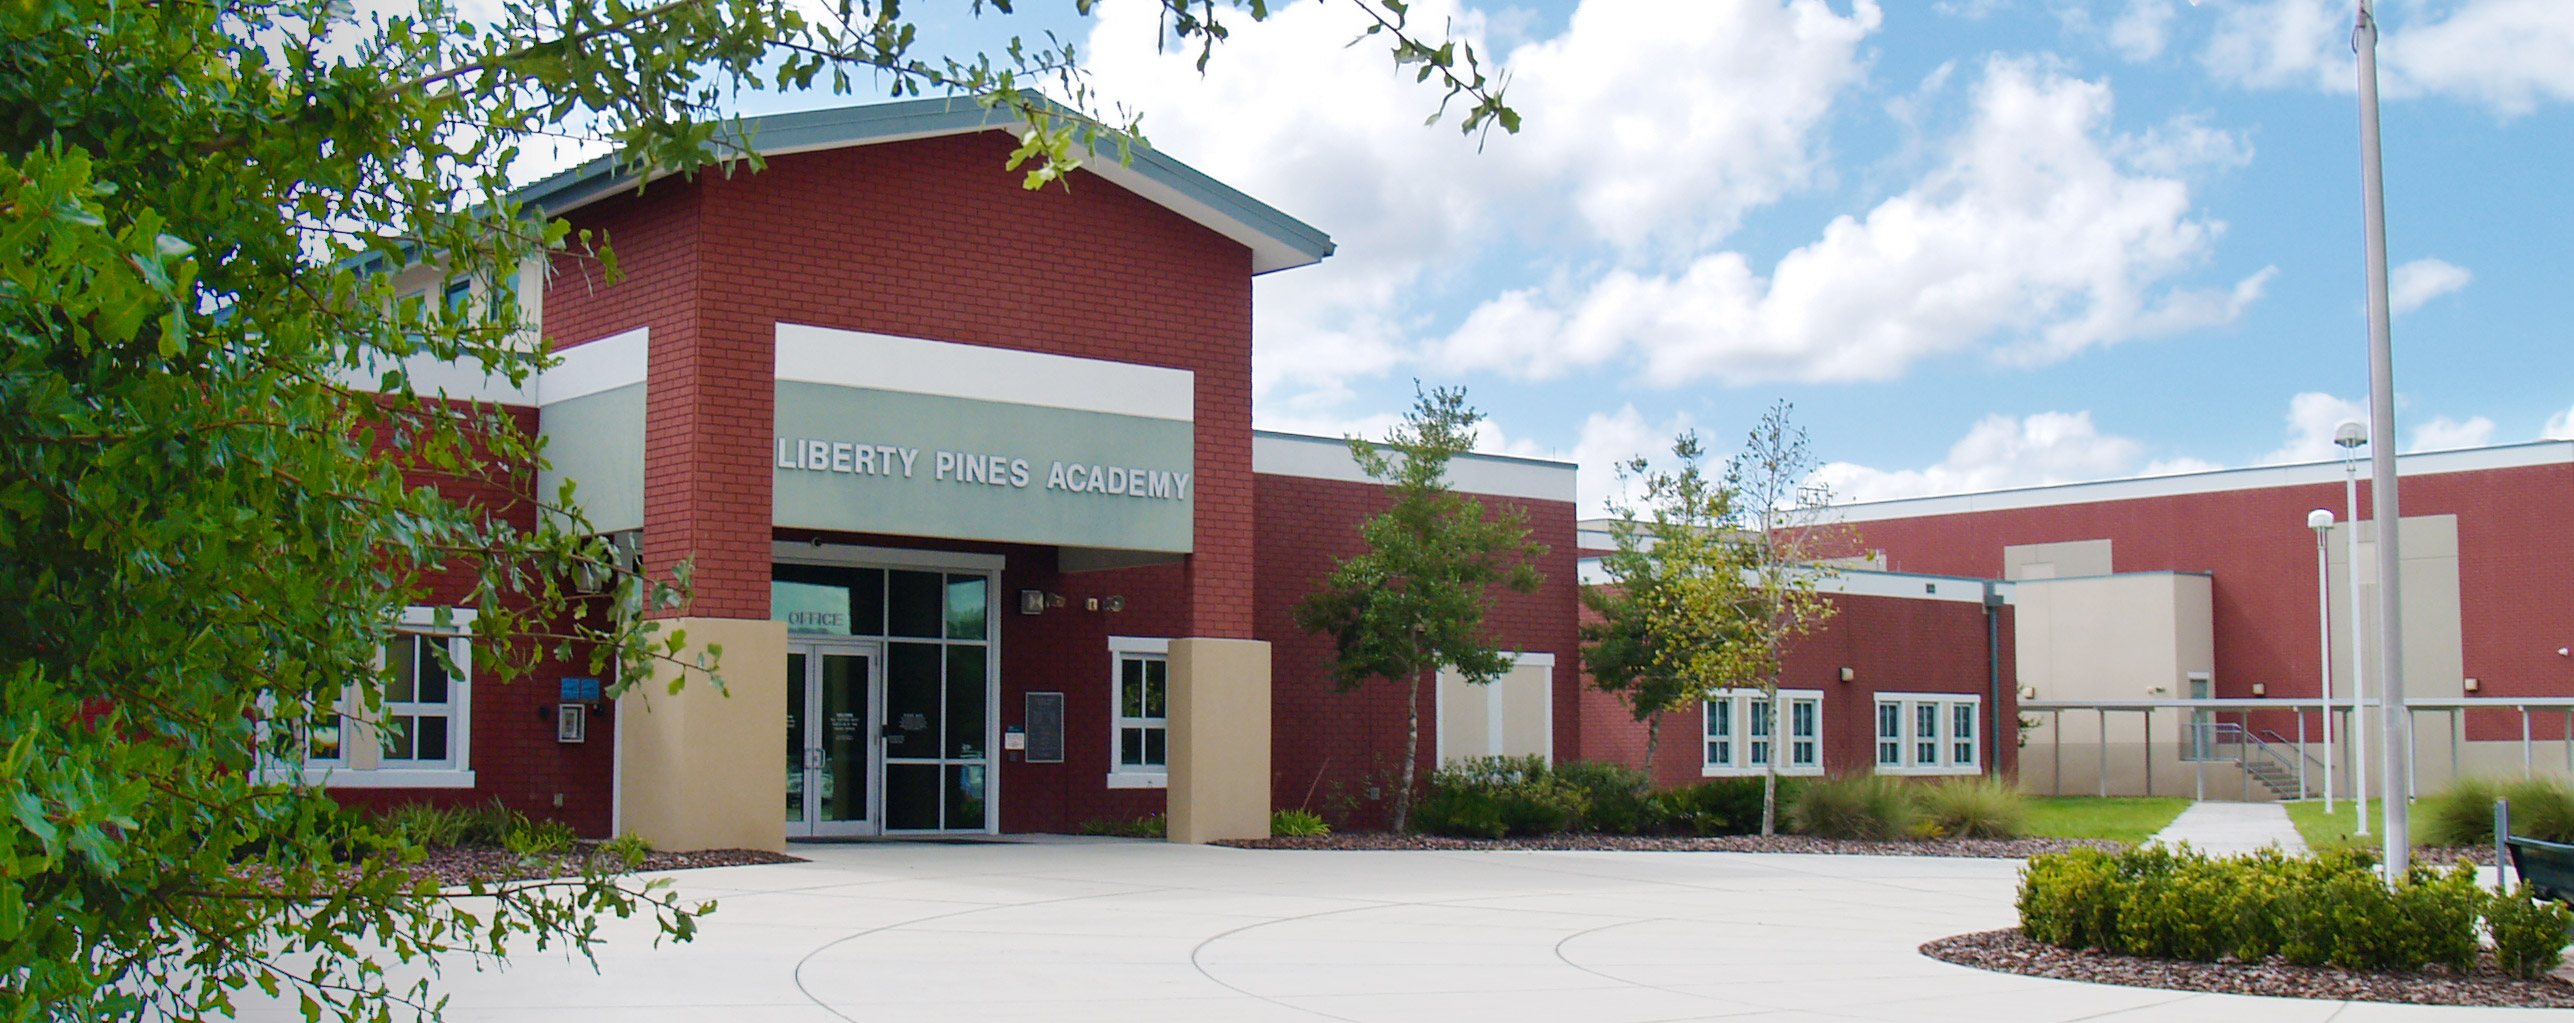 liberty pines academy phone number